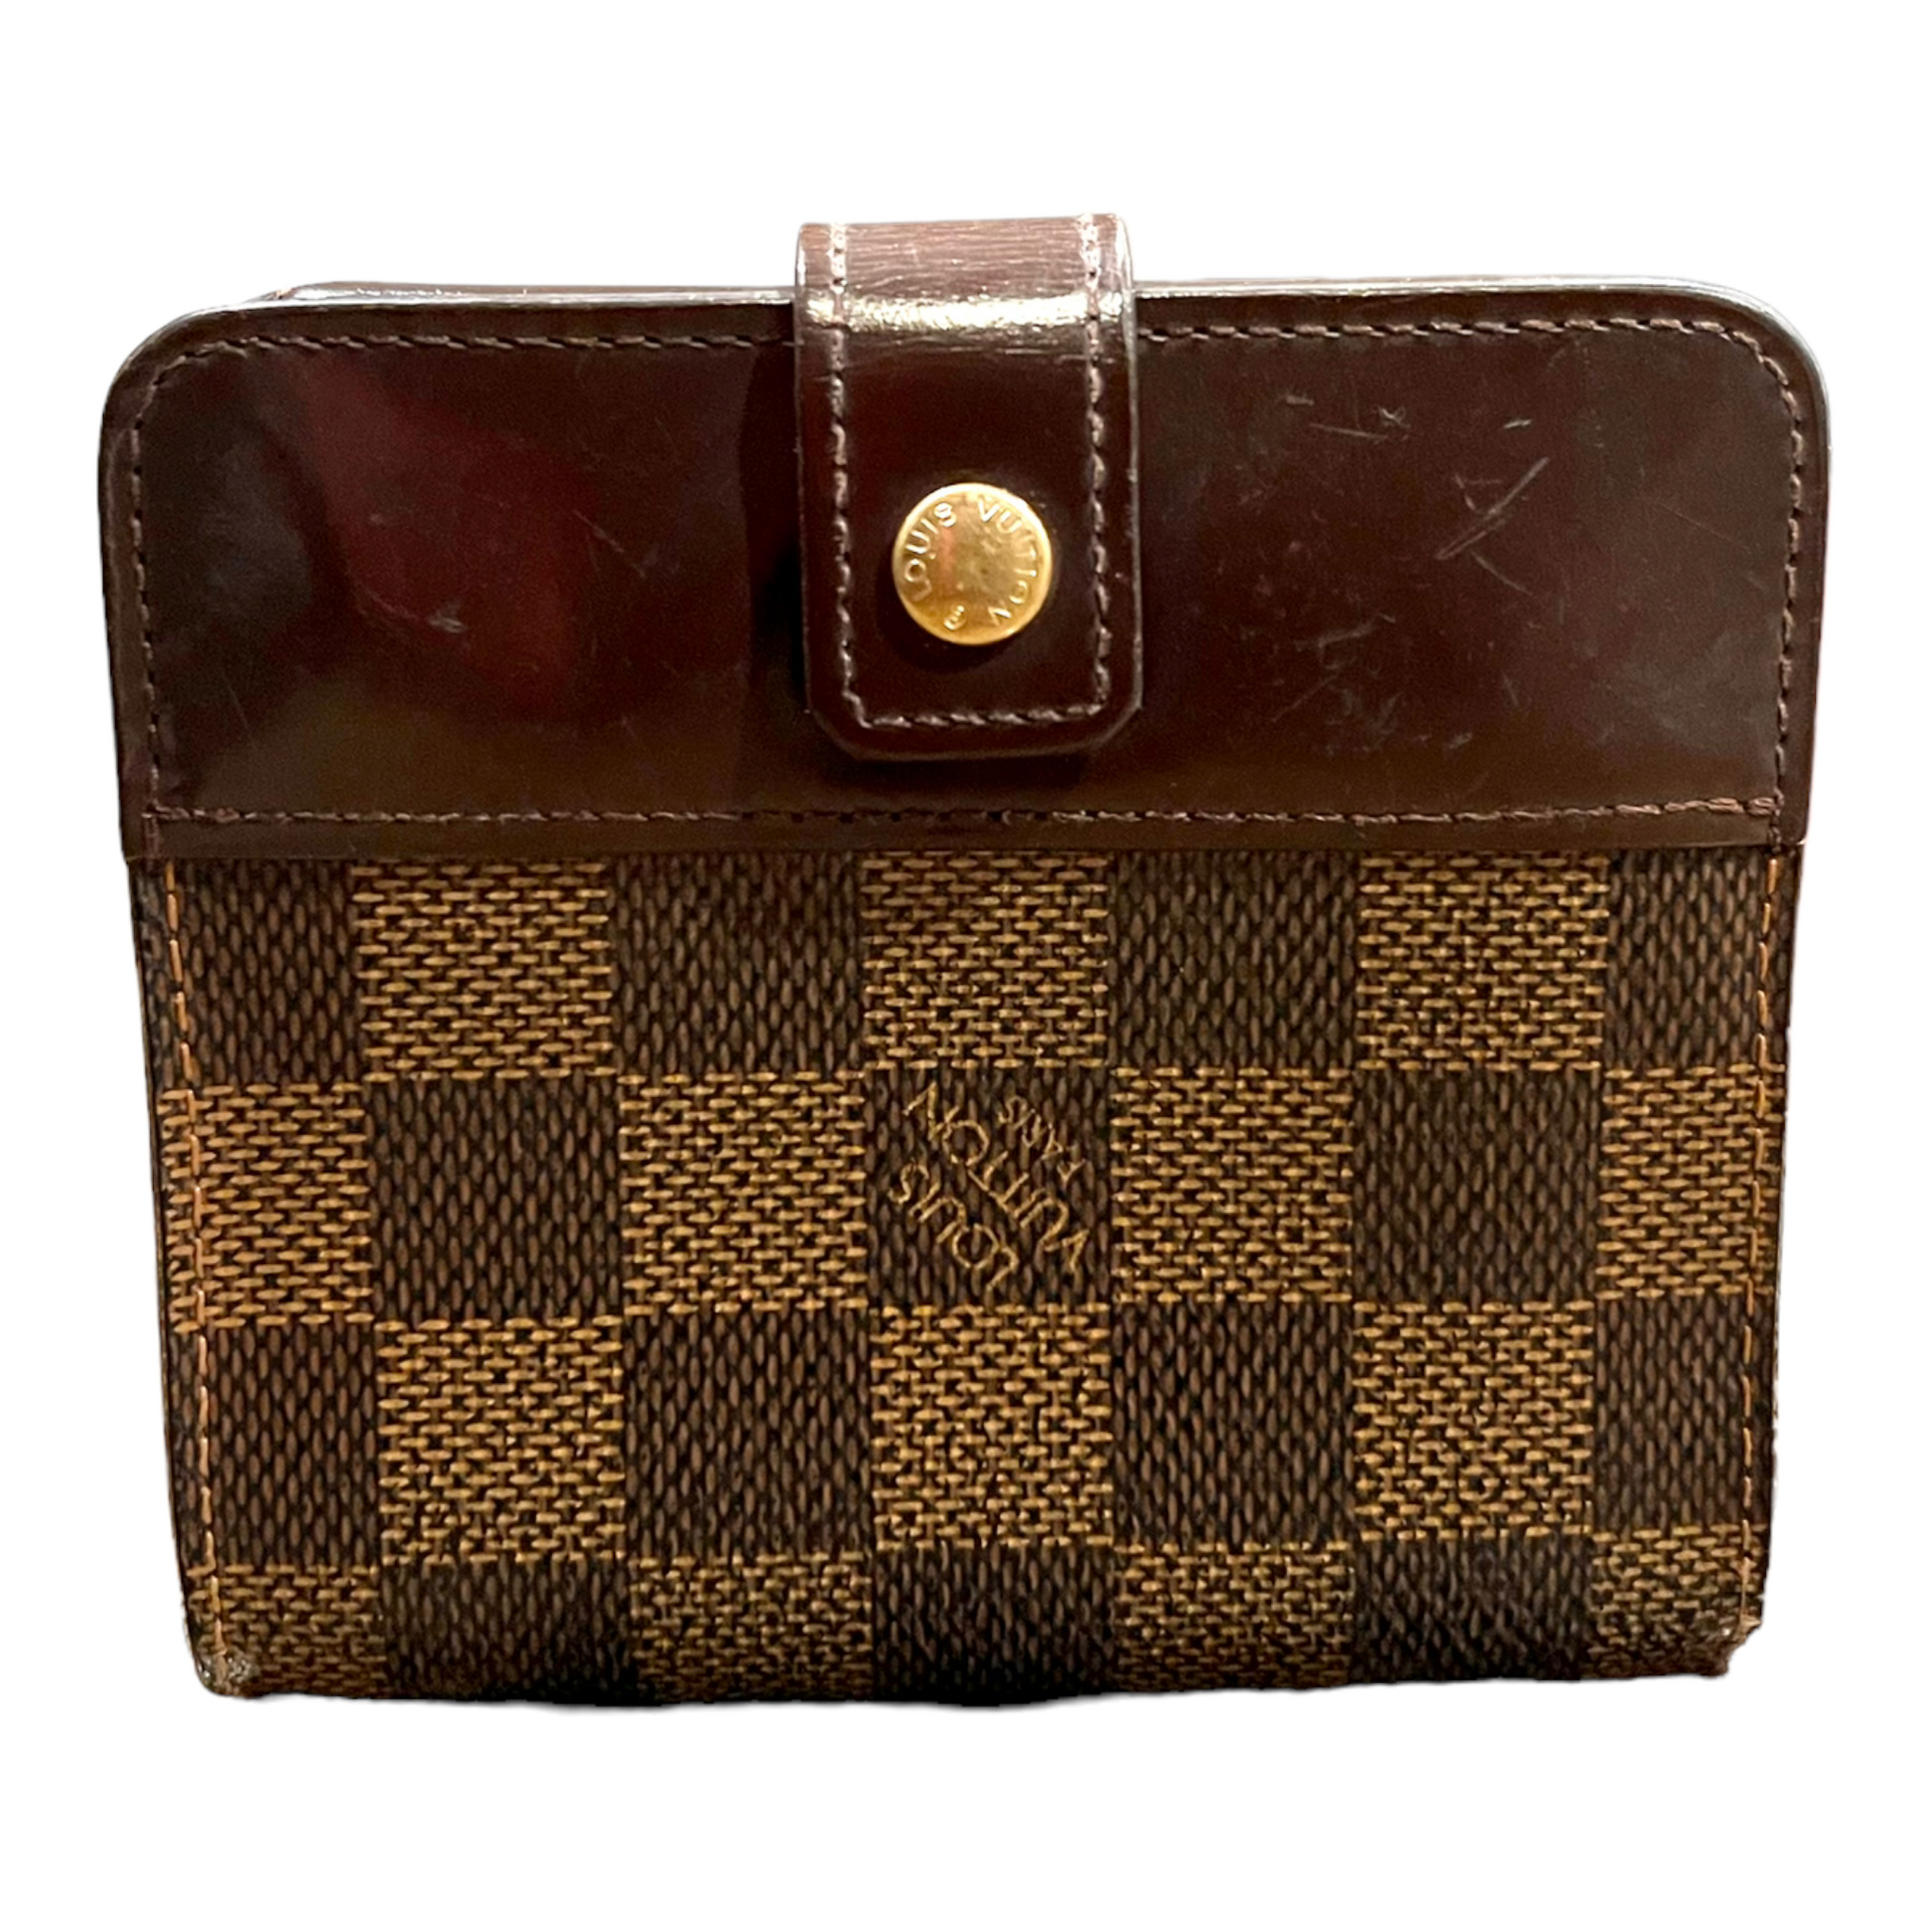 Zippy wallet Damier Ebene Canvas - Wallets and Small Leather Goods